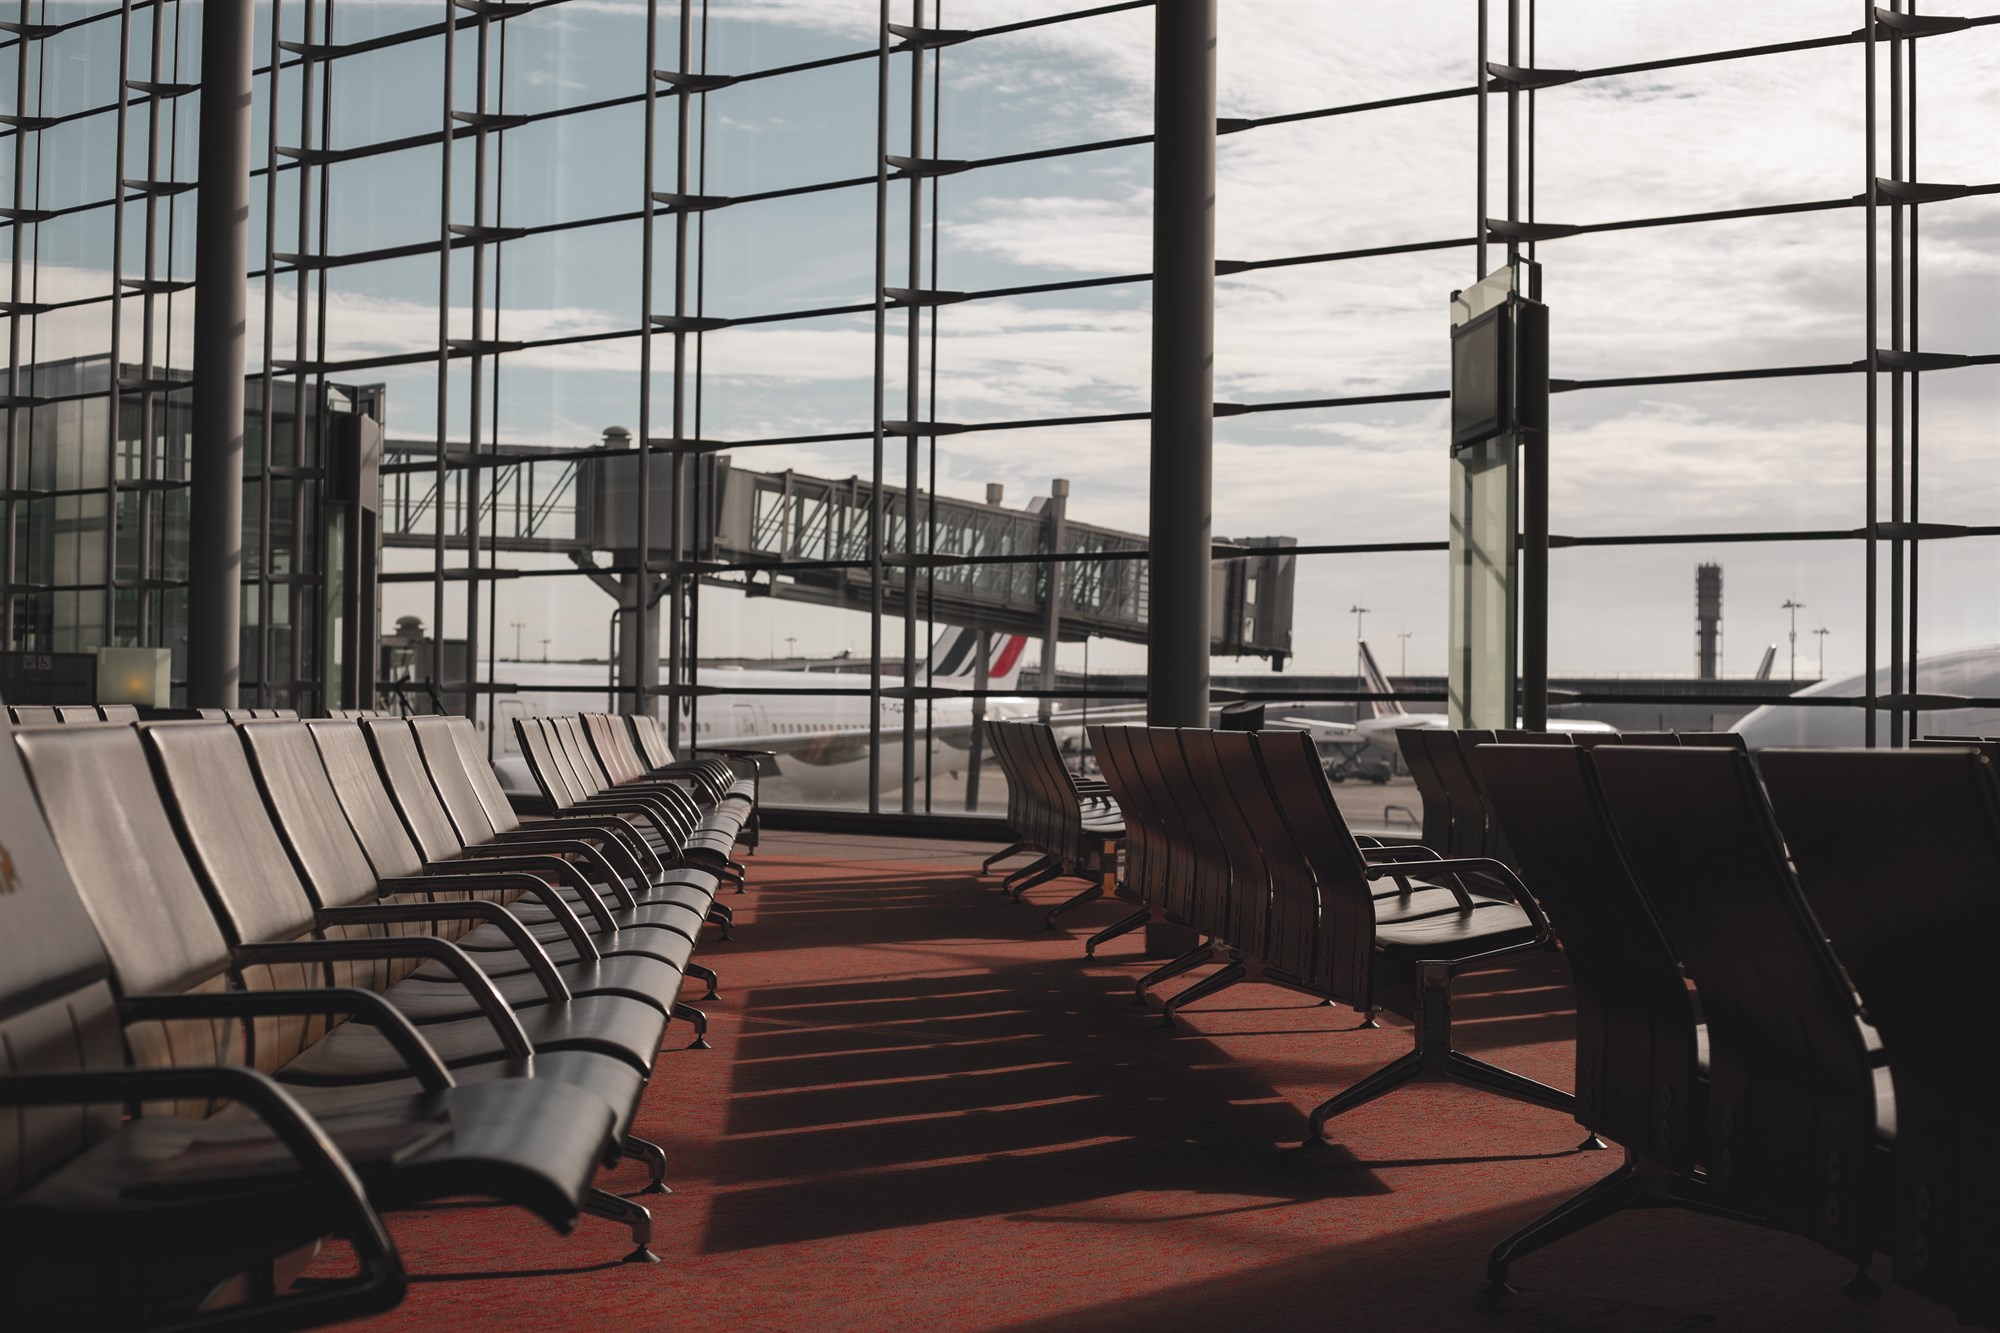 Lounge chairs in an airport terminal